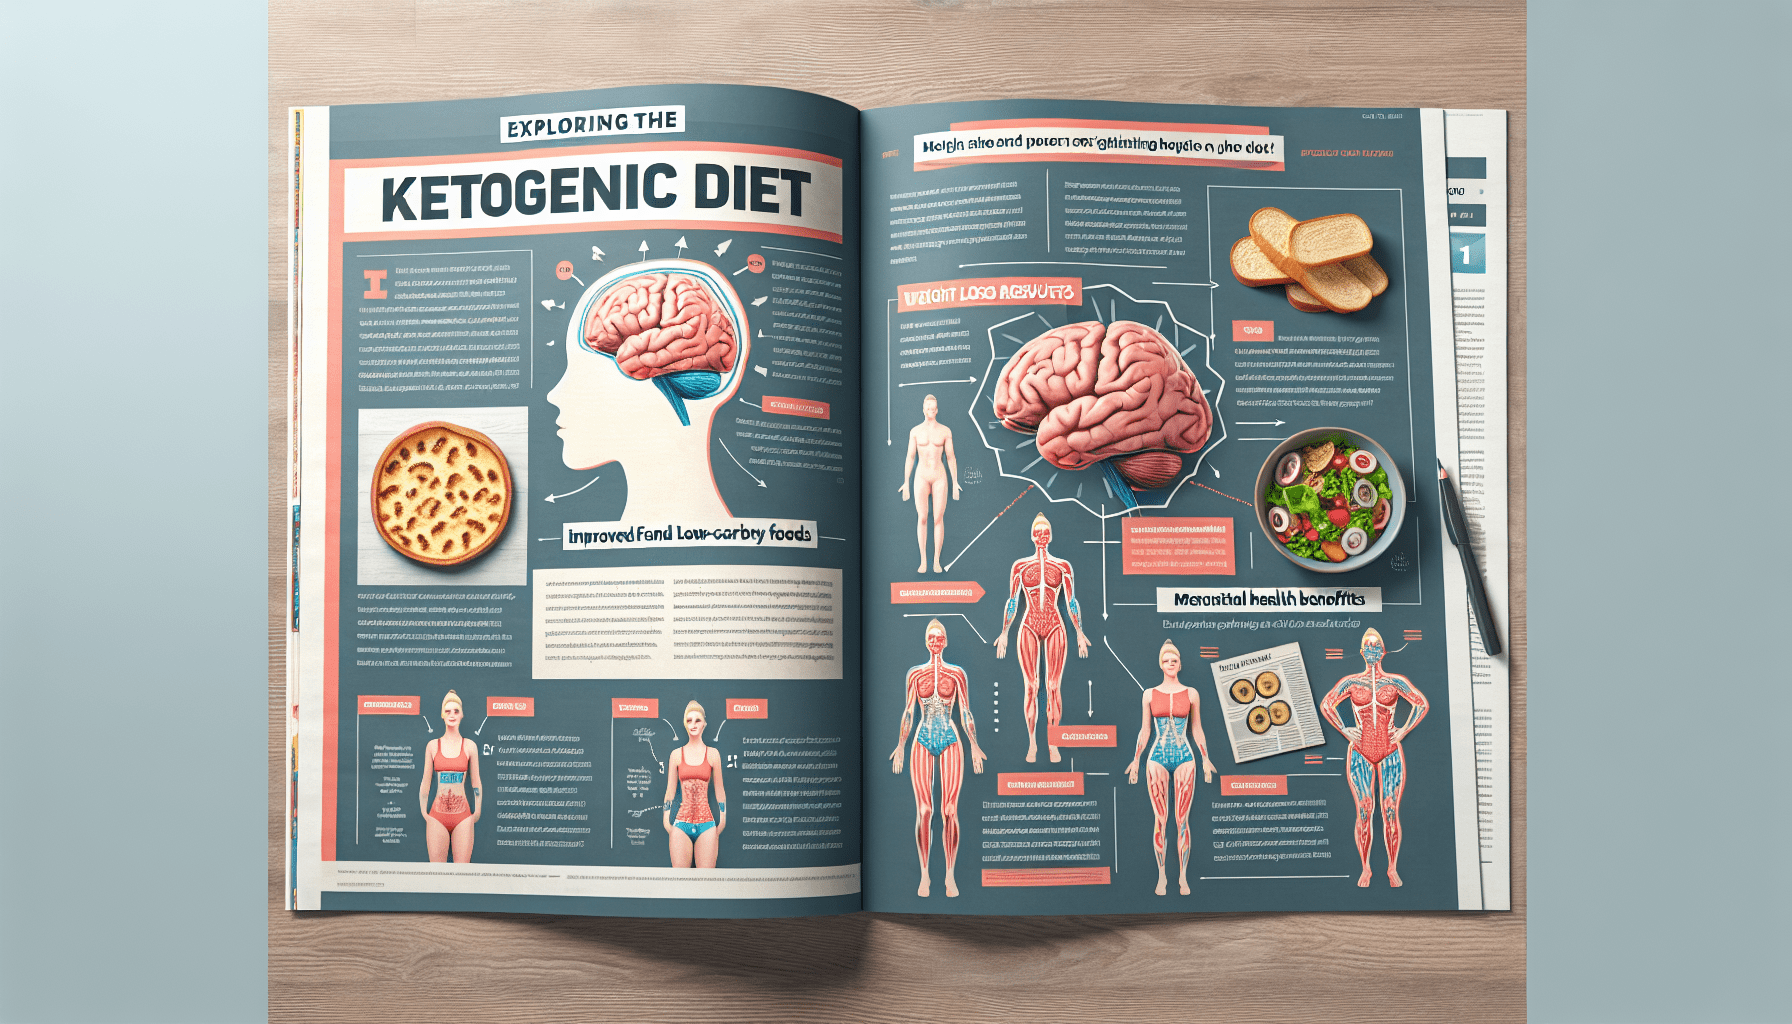 An Overview of the Ketogenic Diet